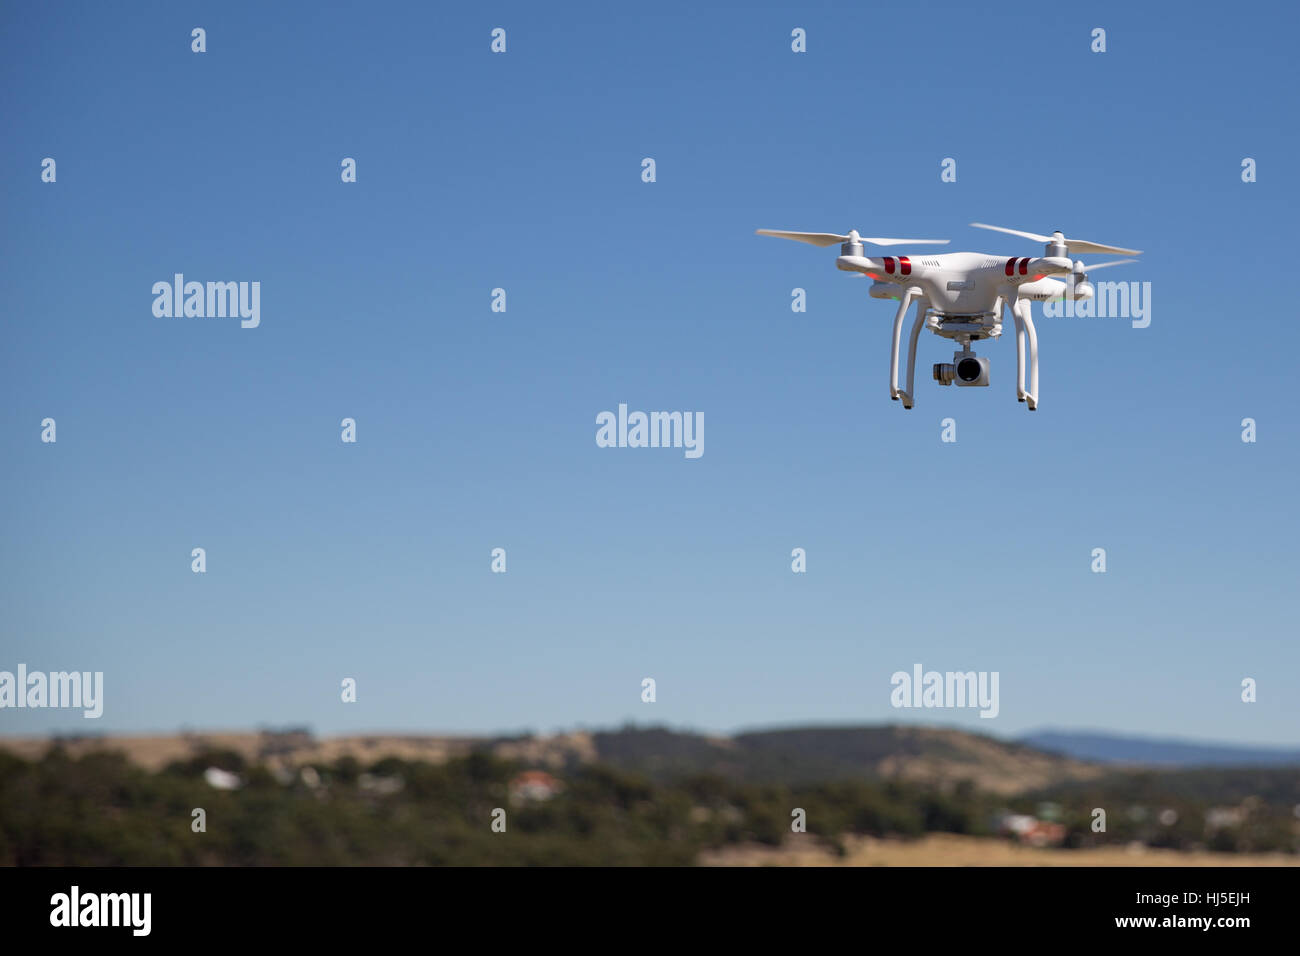 Unmanned Aerial Vehicle (UAV) or Drone, safely flying in a field. Stock Photo